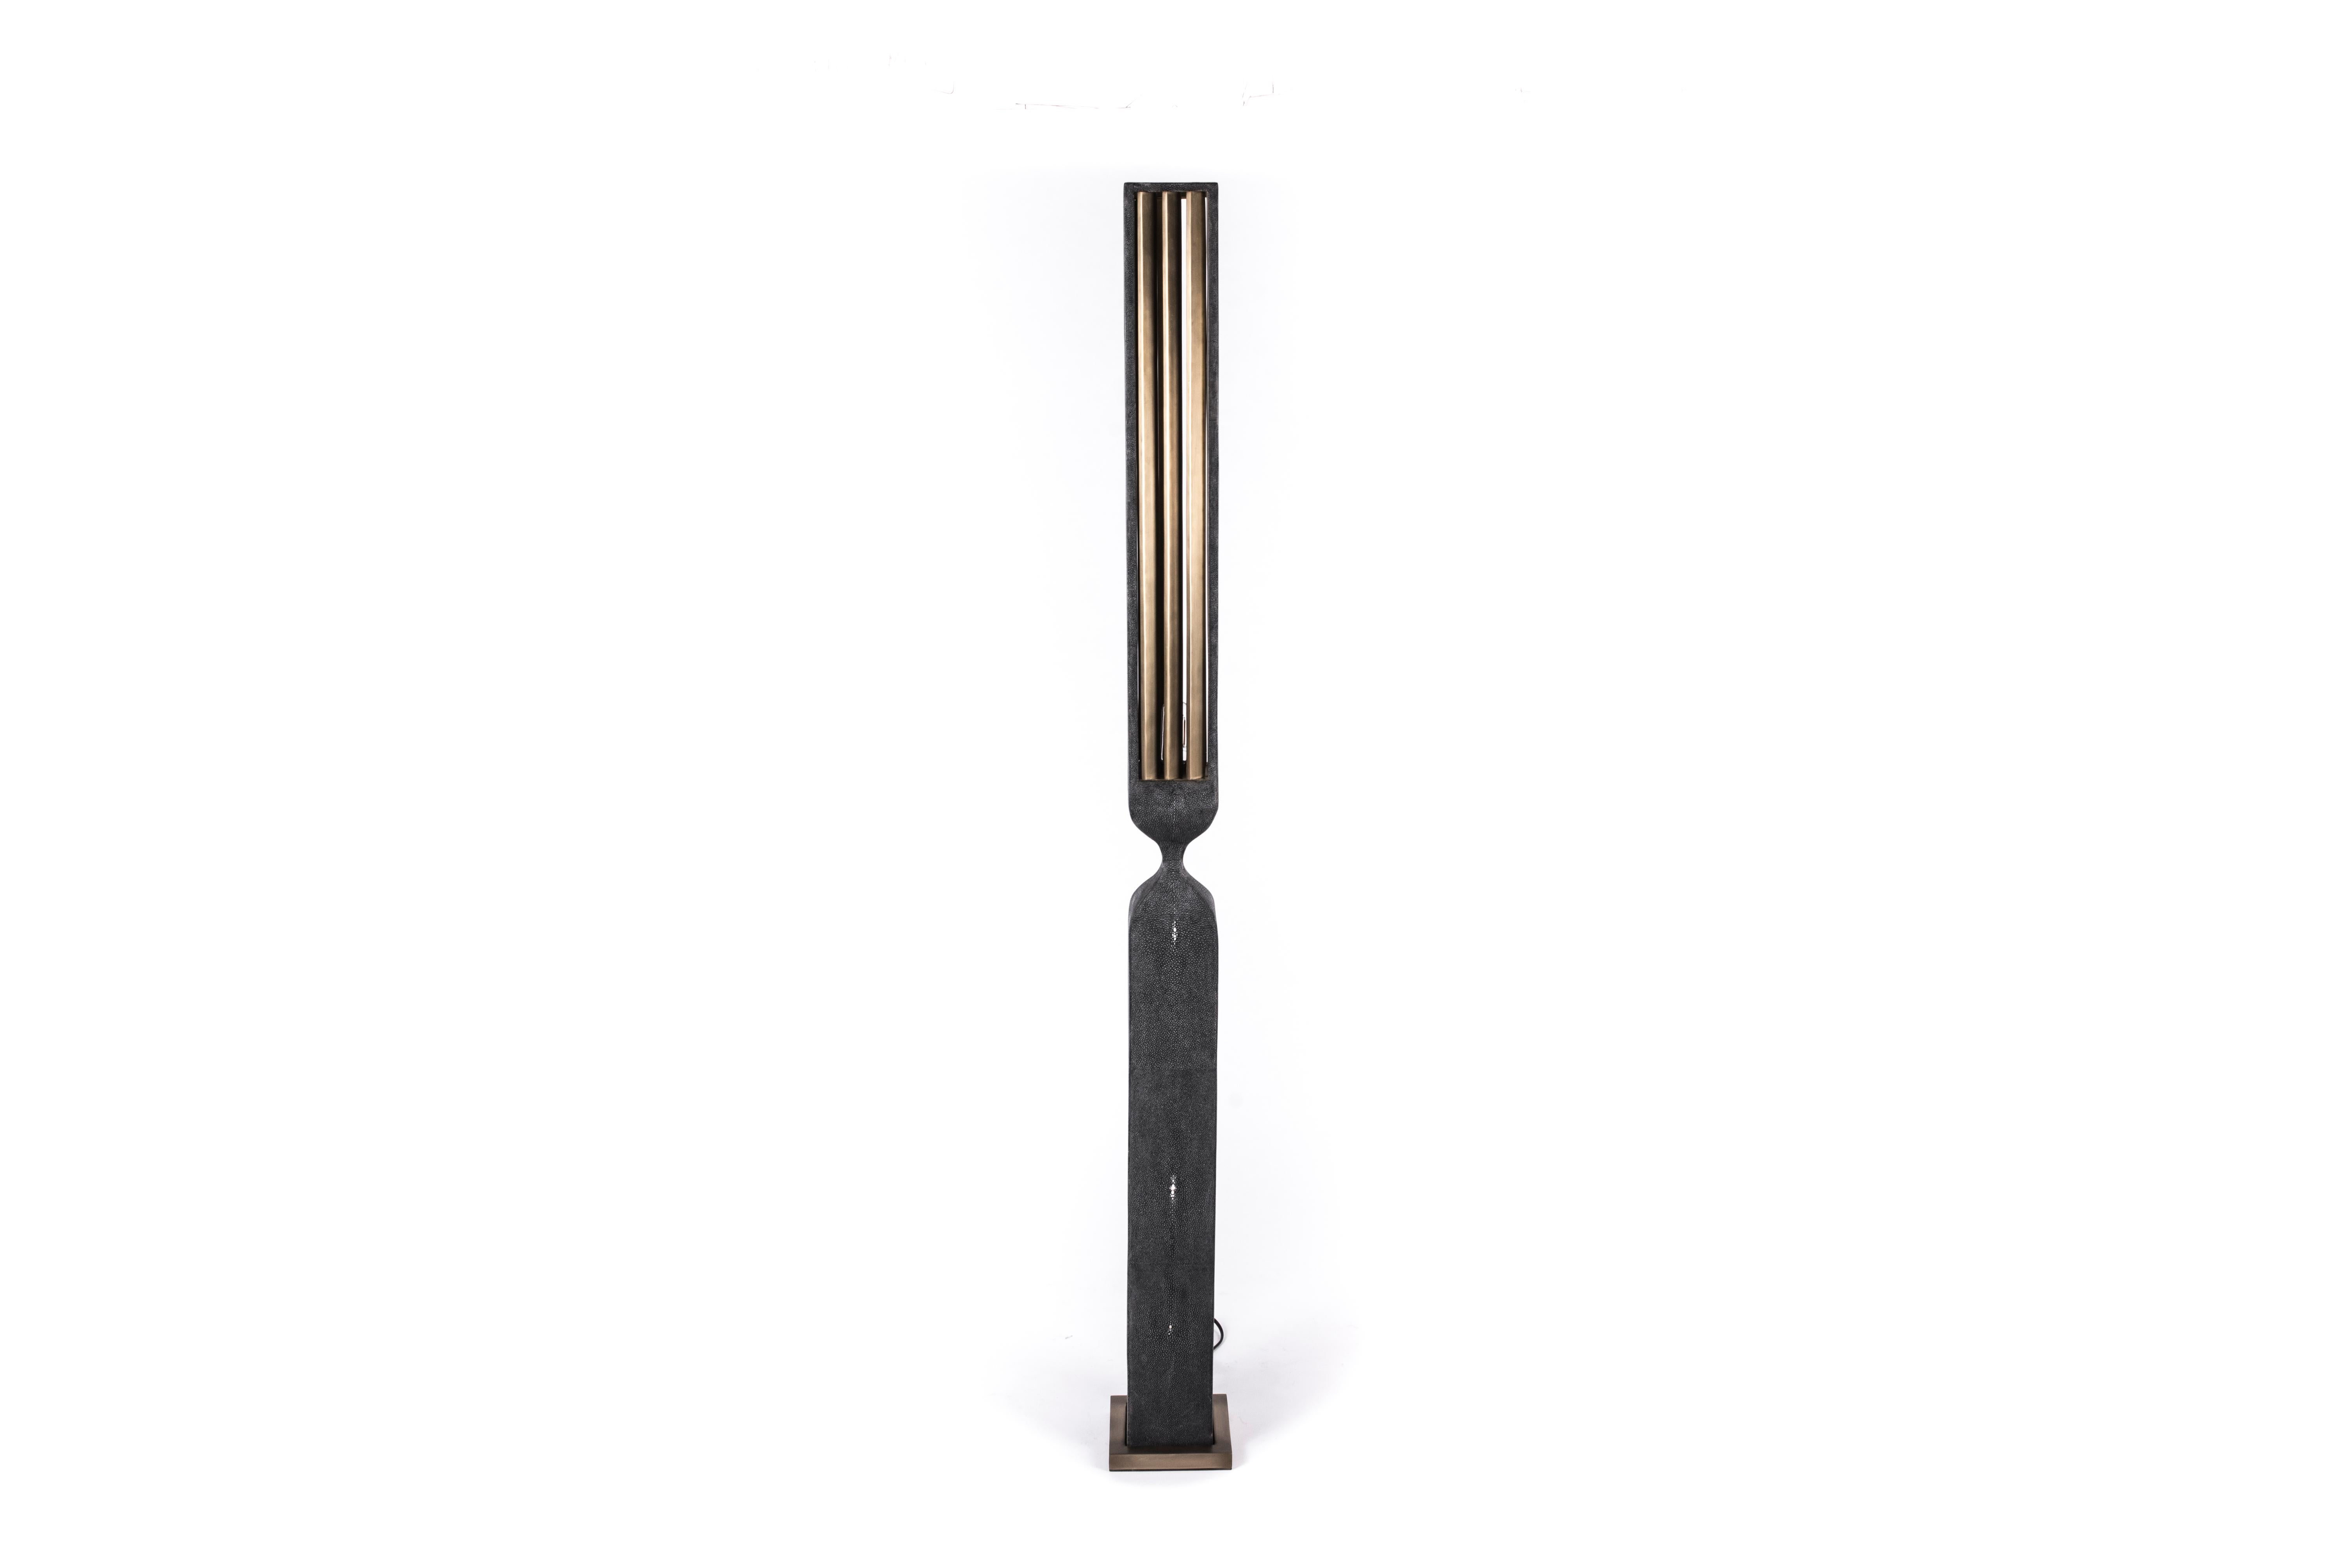 Patrick Coard Paris launches a unique and beautifully sculptural lighting collection inspired by music as a continuation of his candle line. The Rhapsody floor lamp in bronze-patina brass and coal black shagreen is an ethereal and sculptural piece.